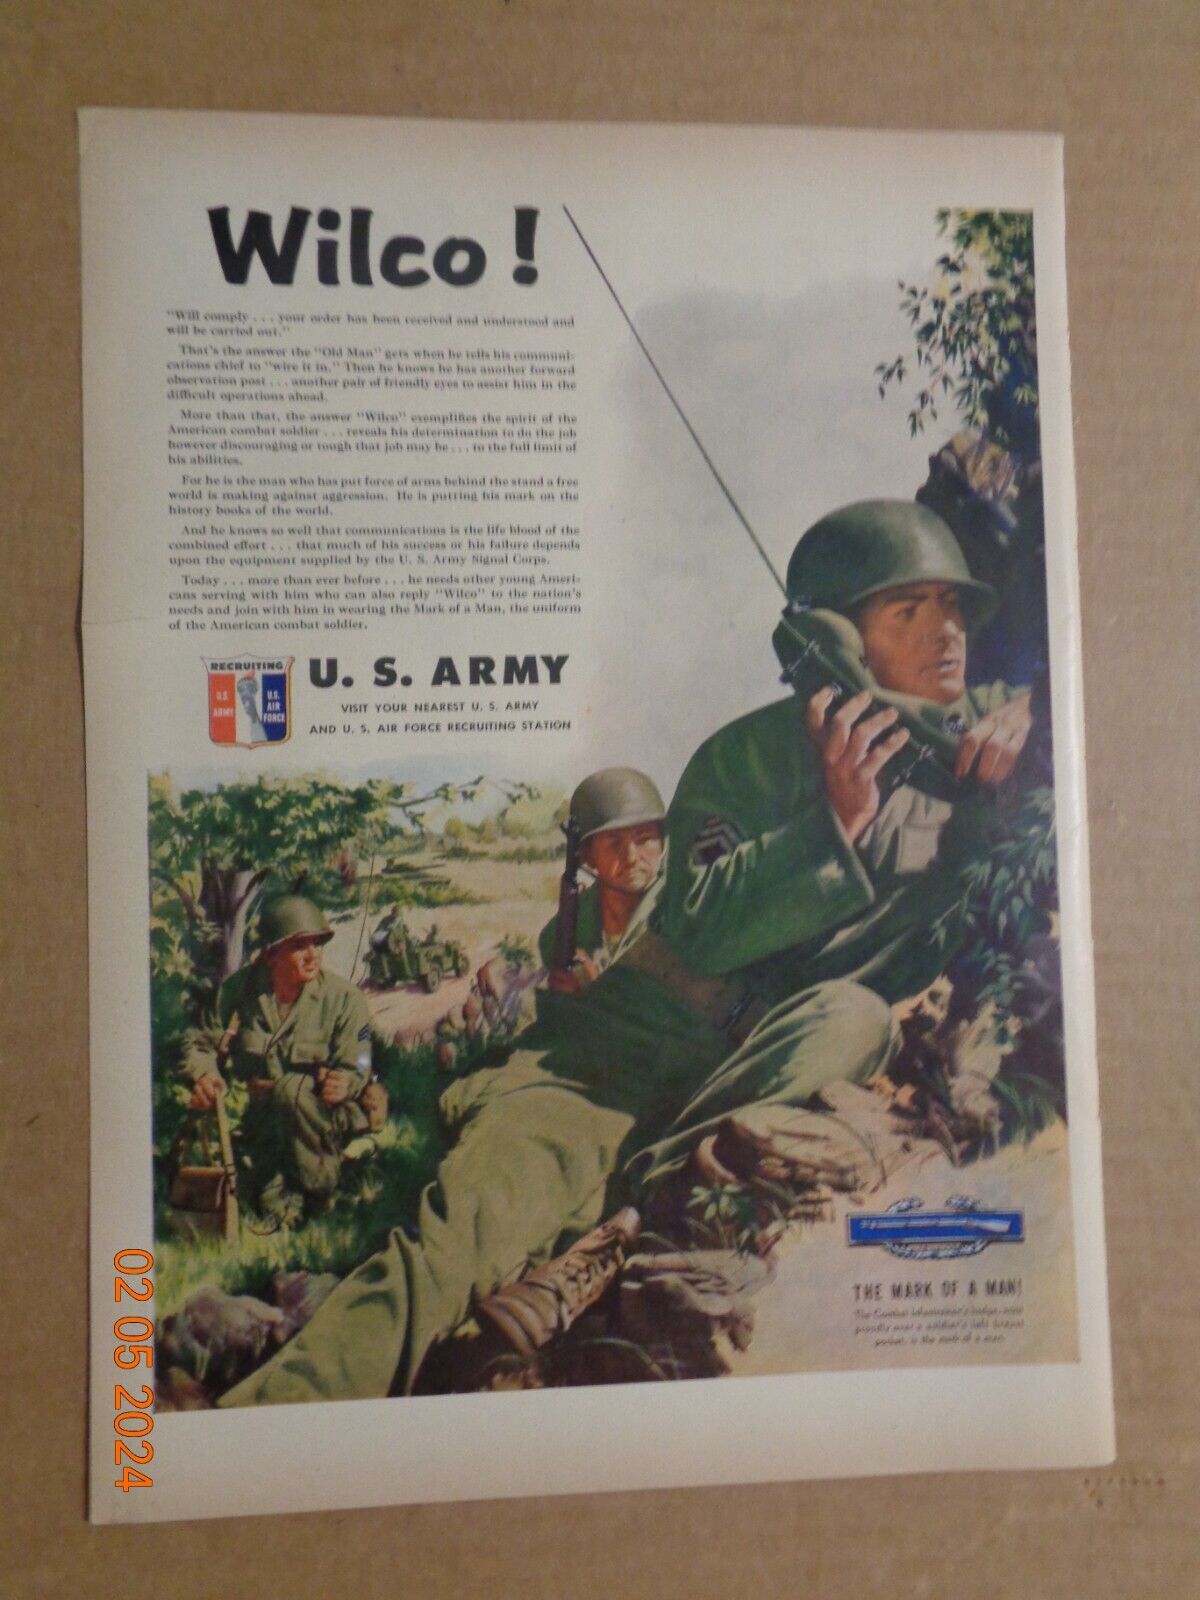 Vintage Print Ad -1951 for U.S. Army Recruitment and Texaco